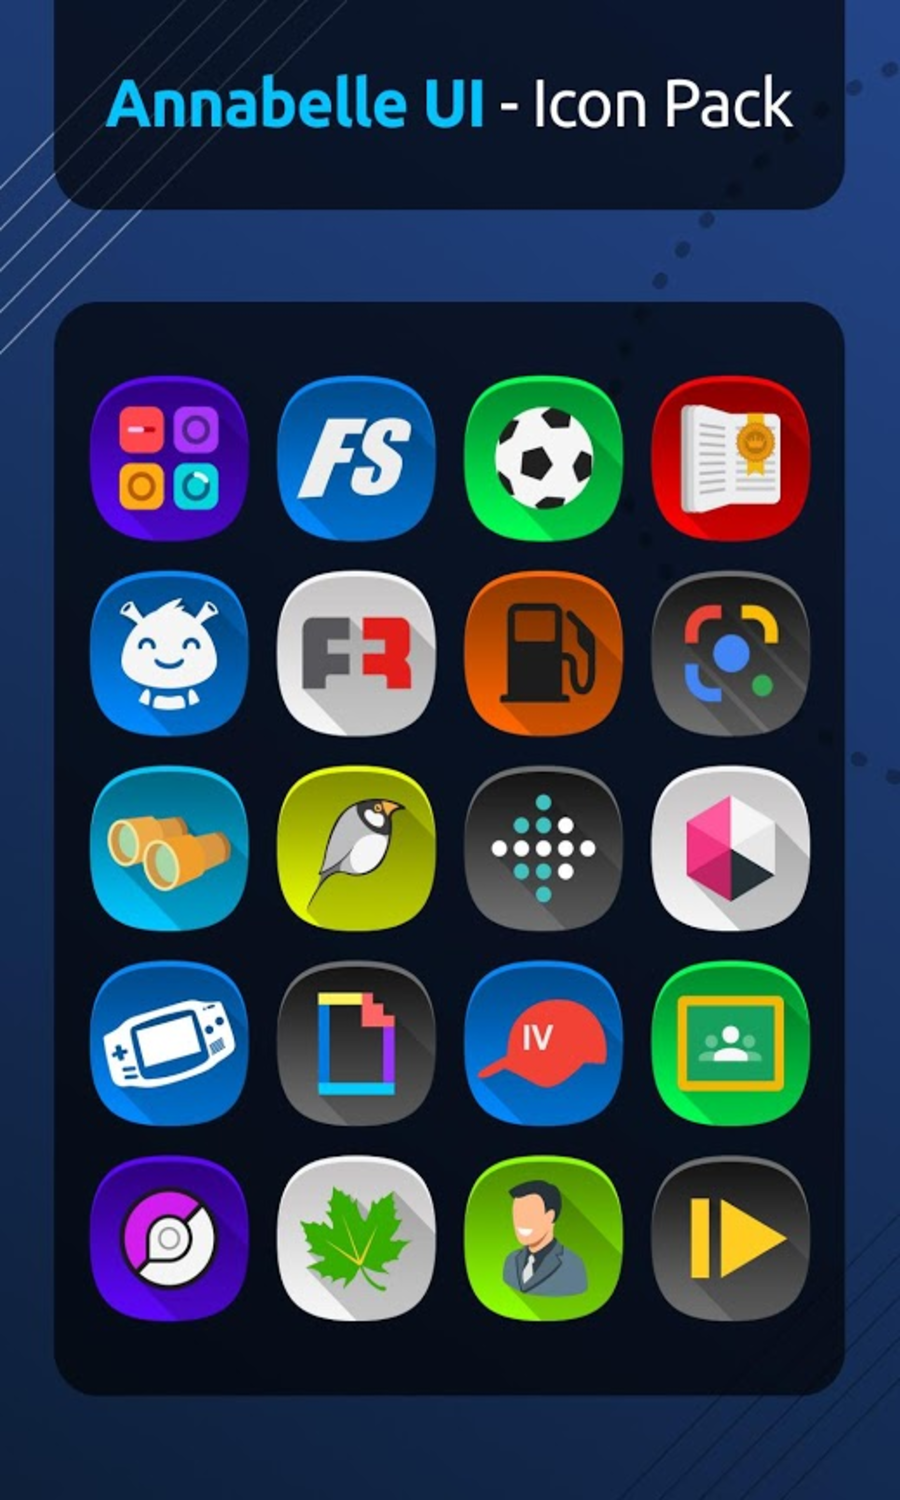 Annabelle UI – Icon Pack v2.1.0 (Patched) Apk